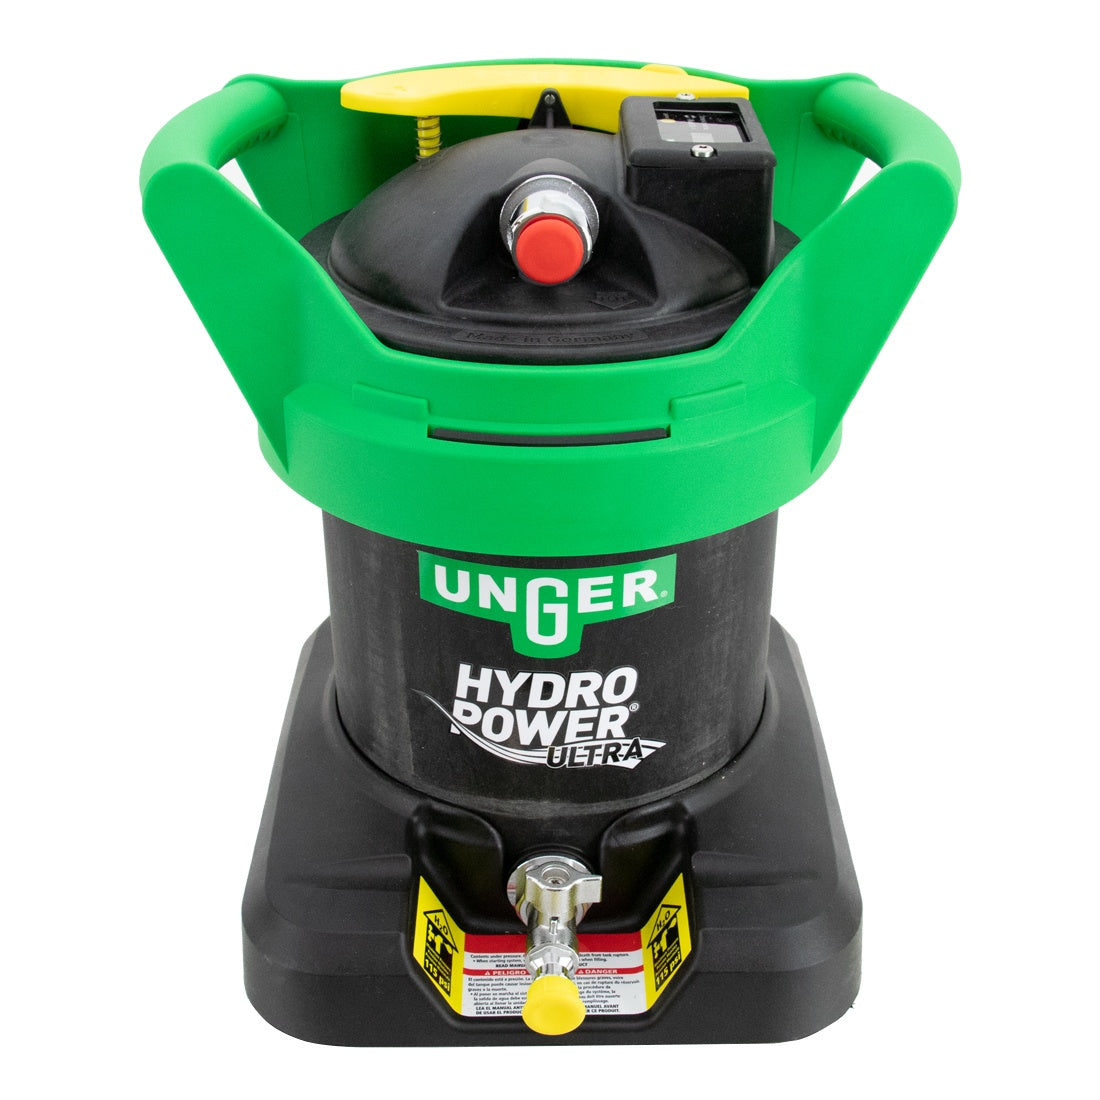 Unger HydroPower Ultra 1-Stage Top View